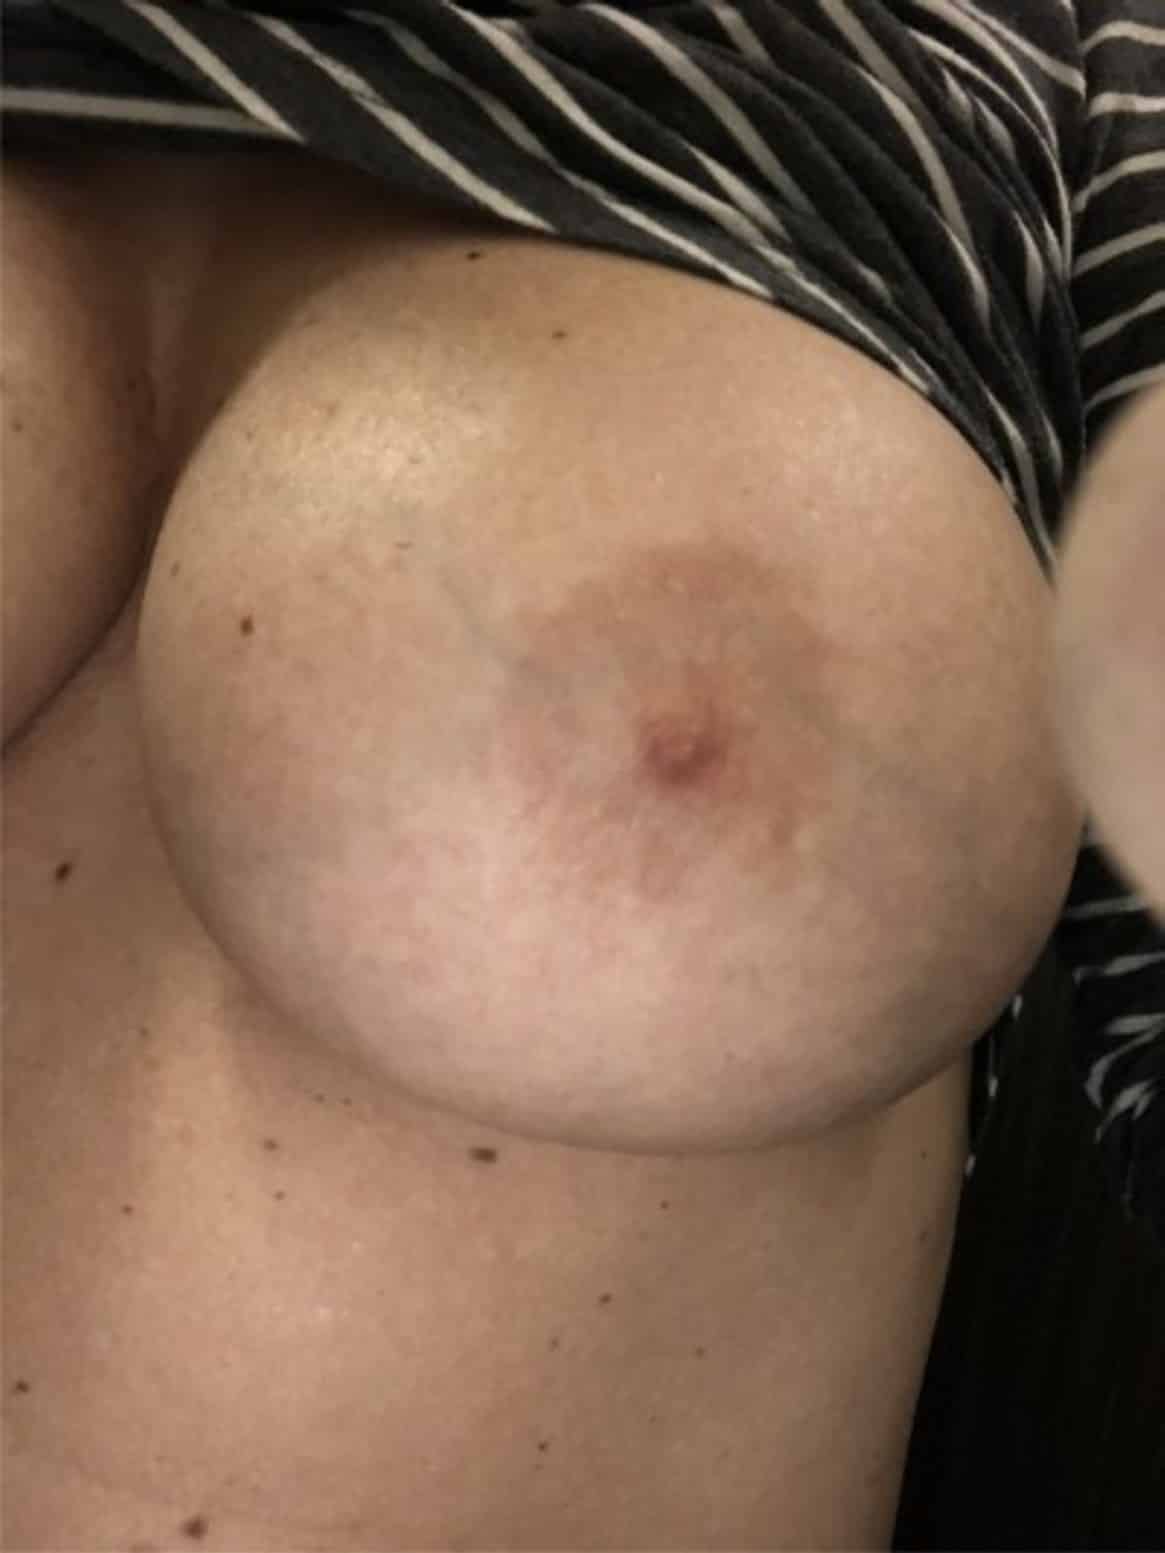 boobs bouncing out of shirt - one boob out one boob out - Boobs Flash Pics